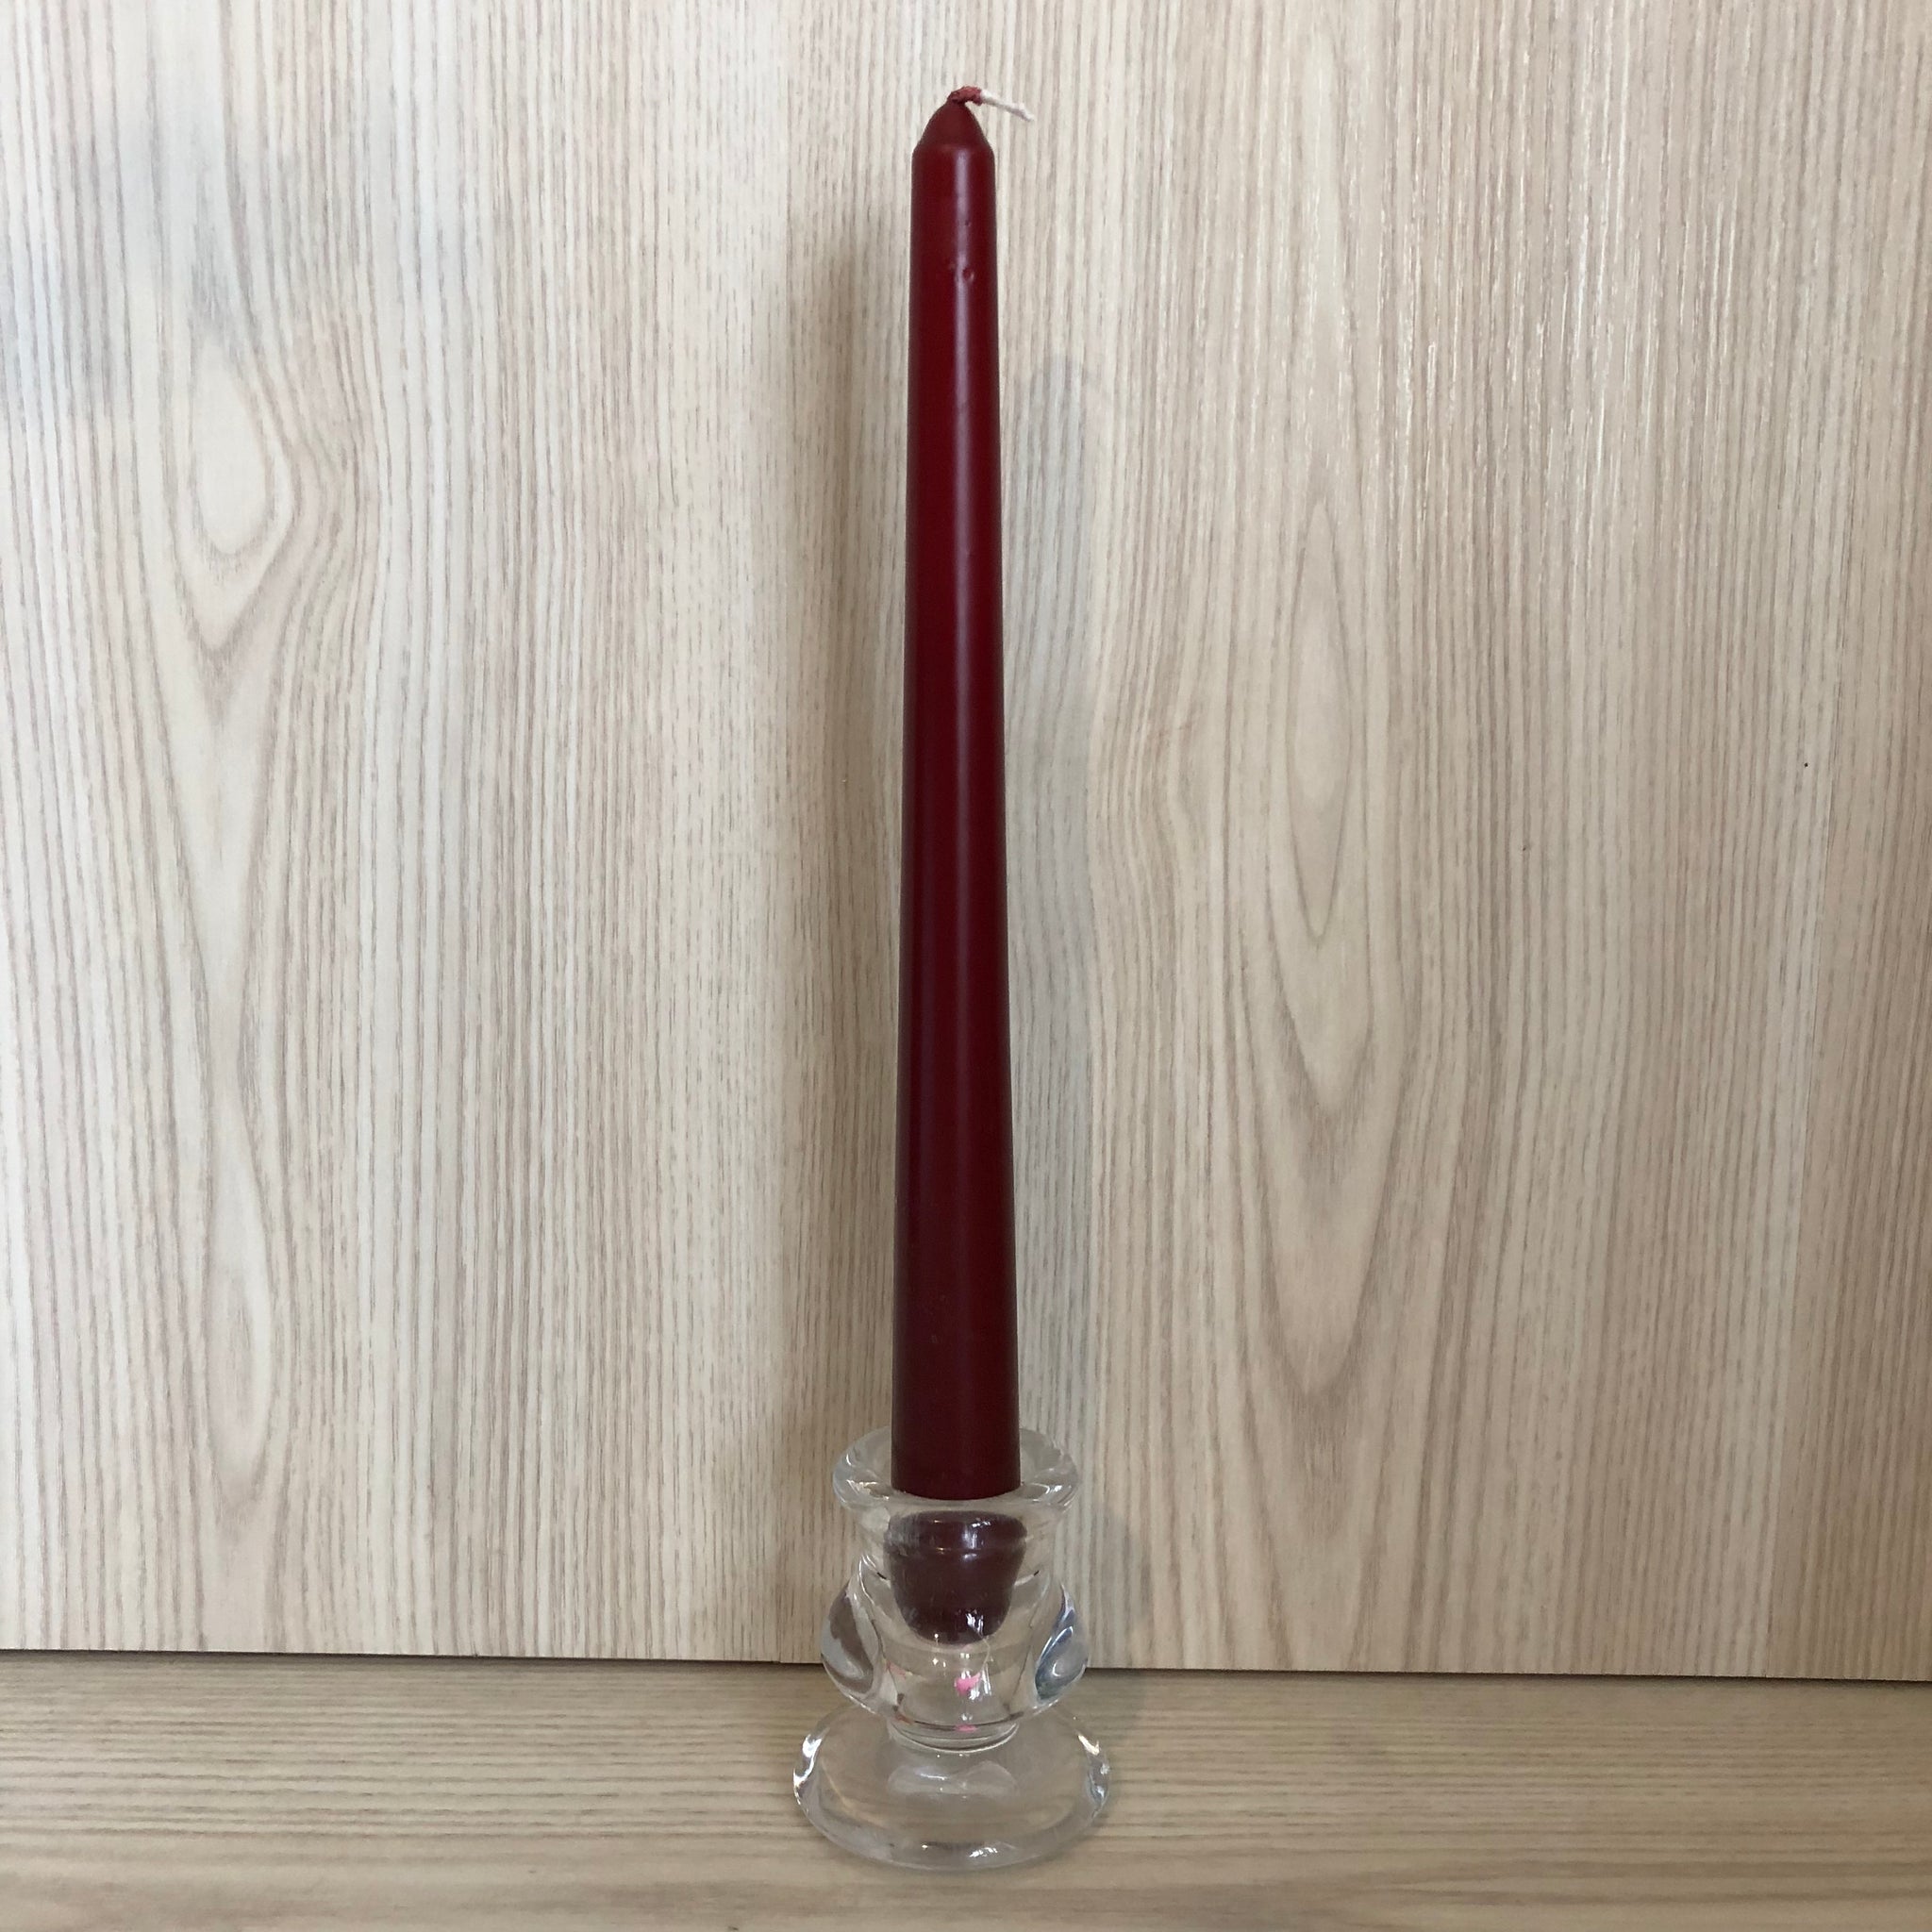 Taper Dinner Candle - Cranberry - The Pretty Prop Shop Parties